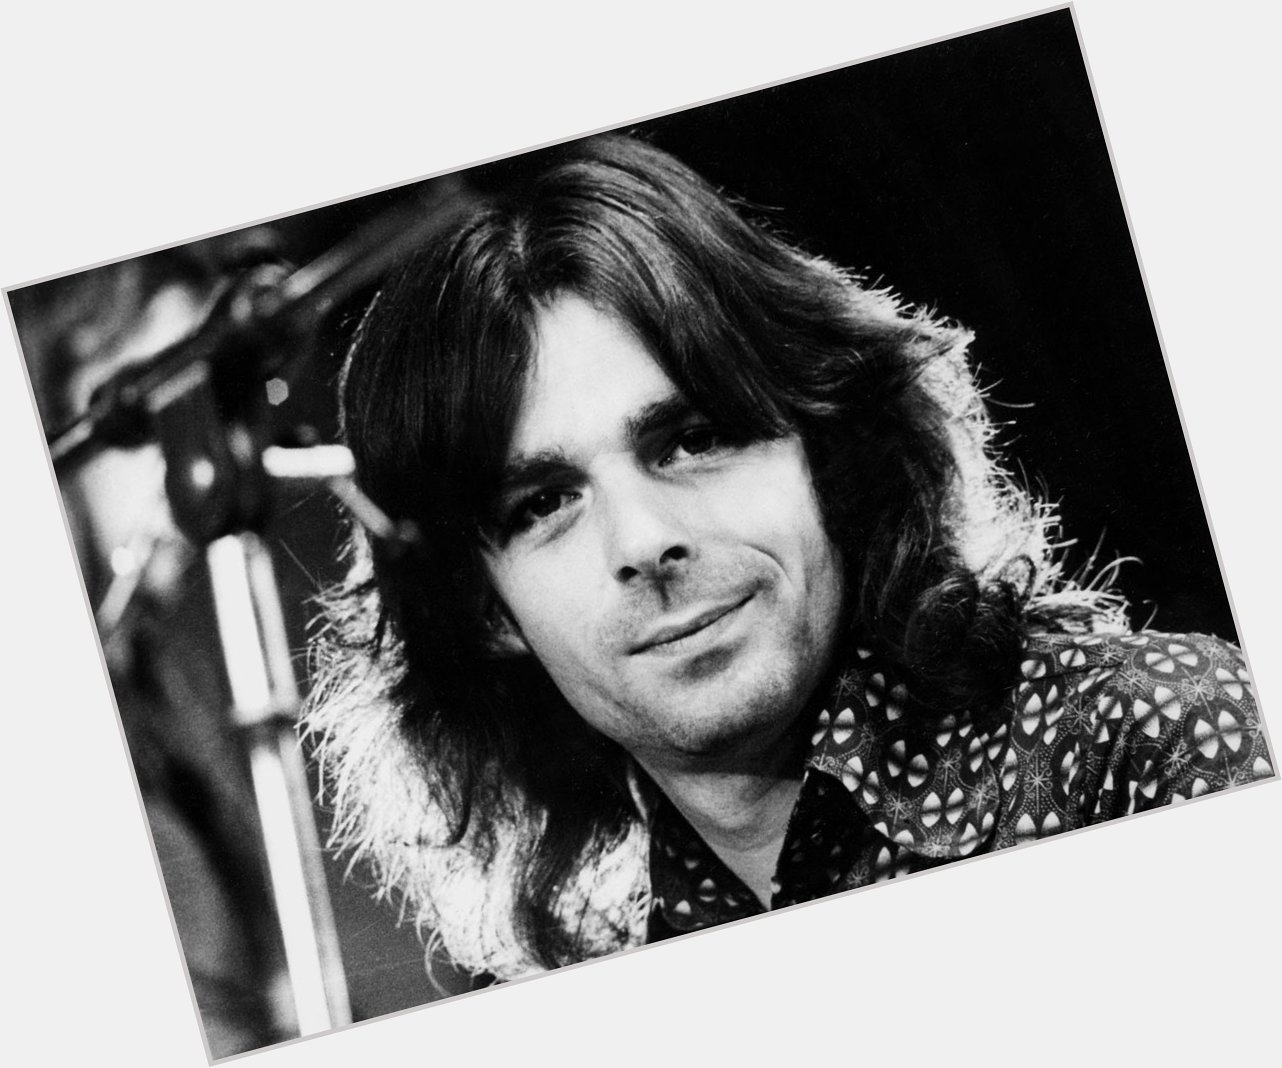 Happy birthday to the talented and wonderful musician that is rick wright!! you are missed dearly  